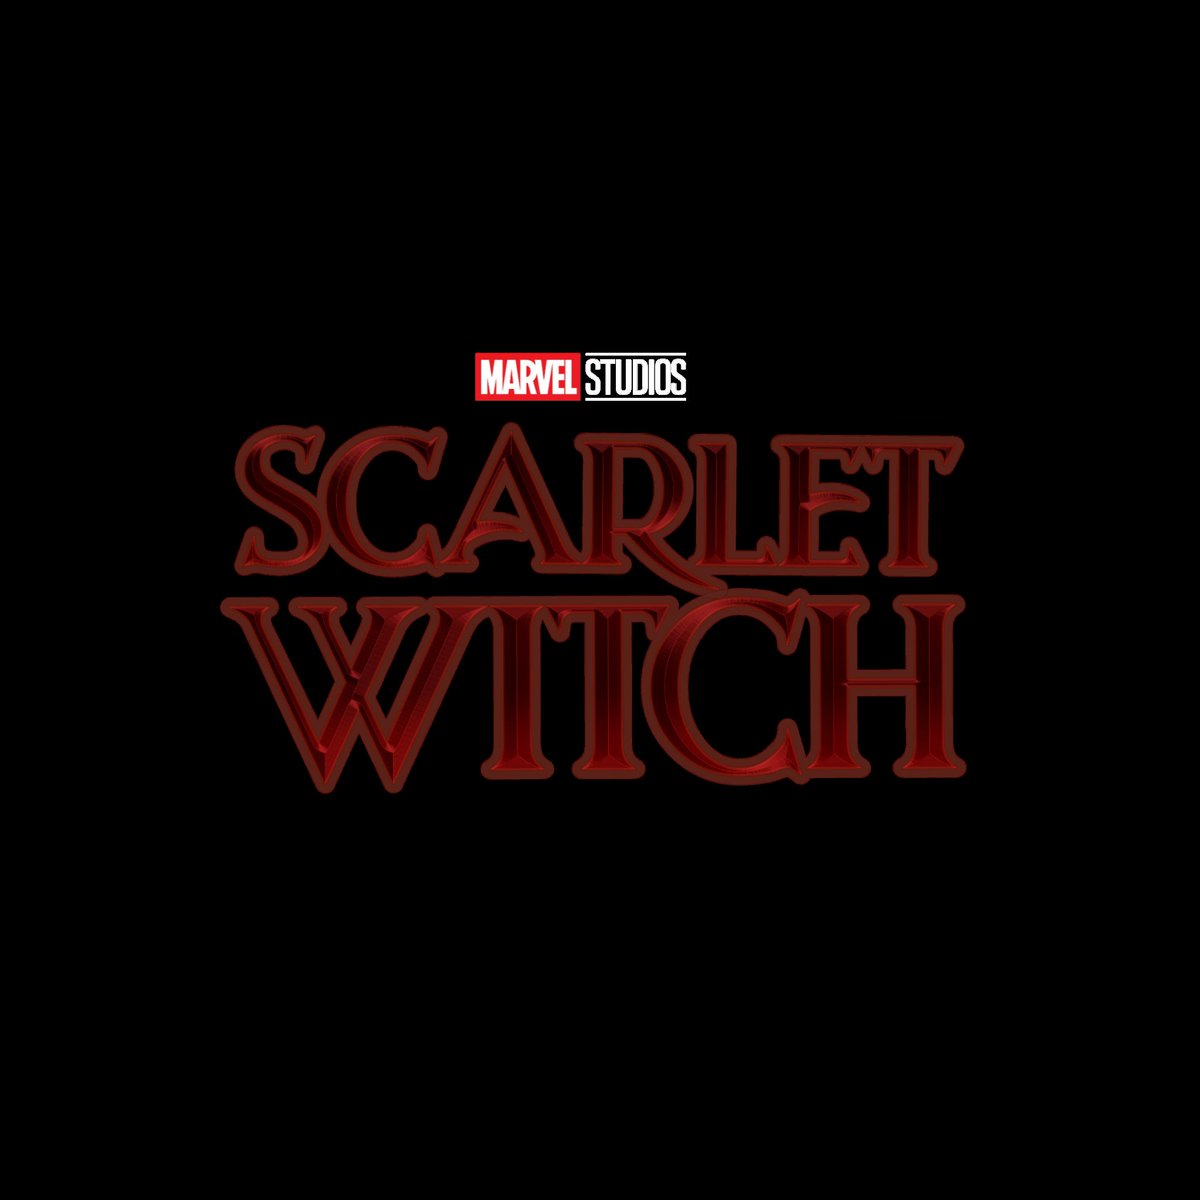 RUMOR | Marvel Studios is looking for a director for the ‘SCARLET WITCH’ movie.
#marvel
#marvelcomics #marvelstudios #comics #mcu
#ComicZone #ComicMagic
Like share Comment and Follow @ComicMagic_784